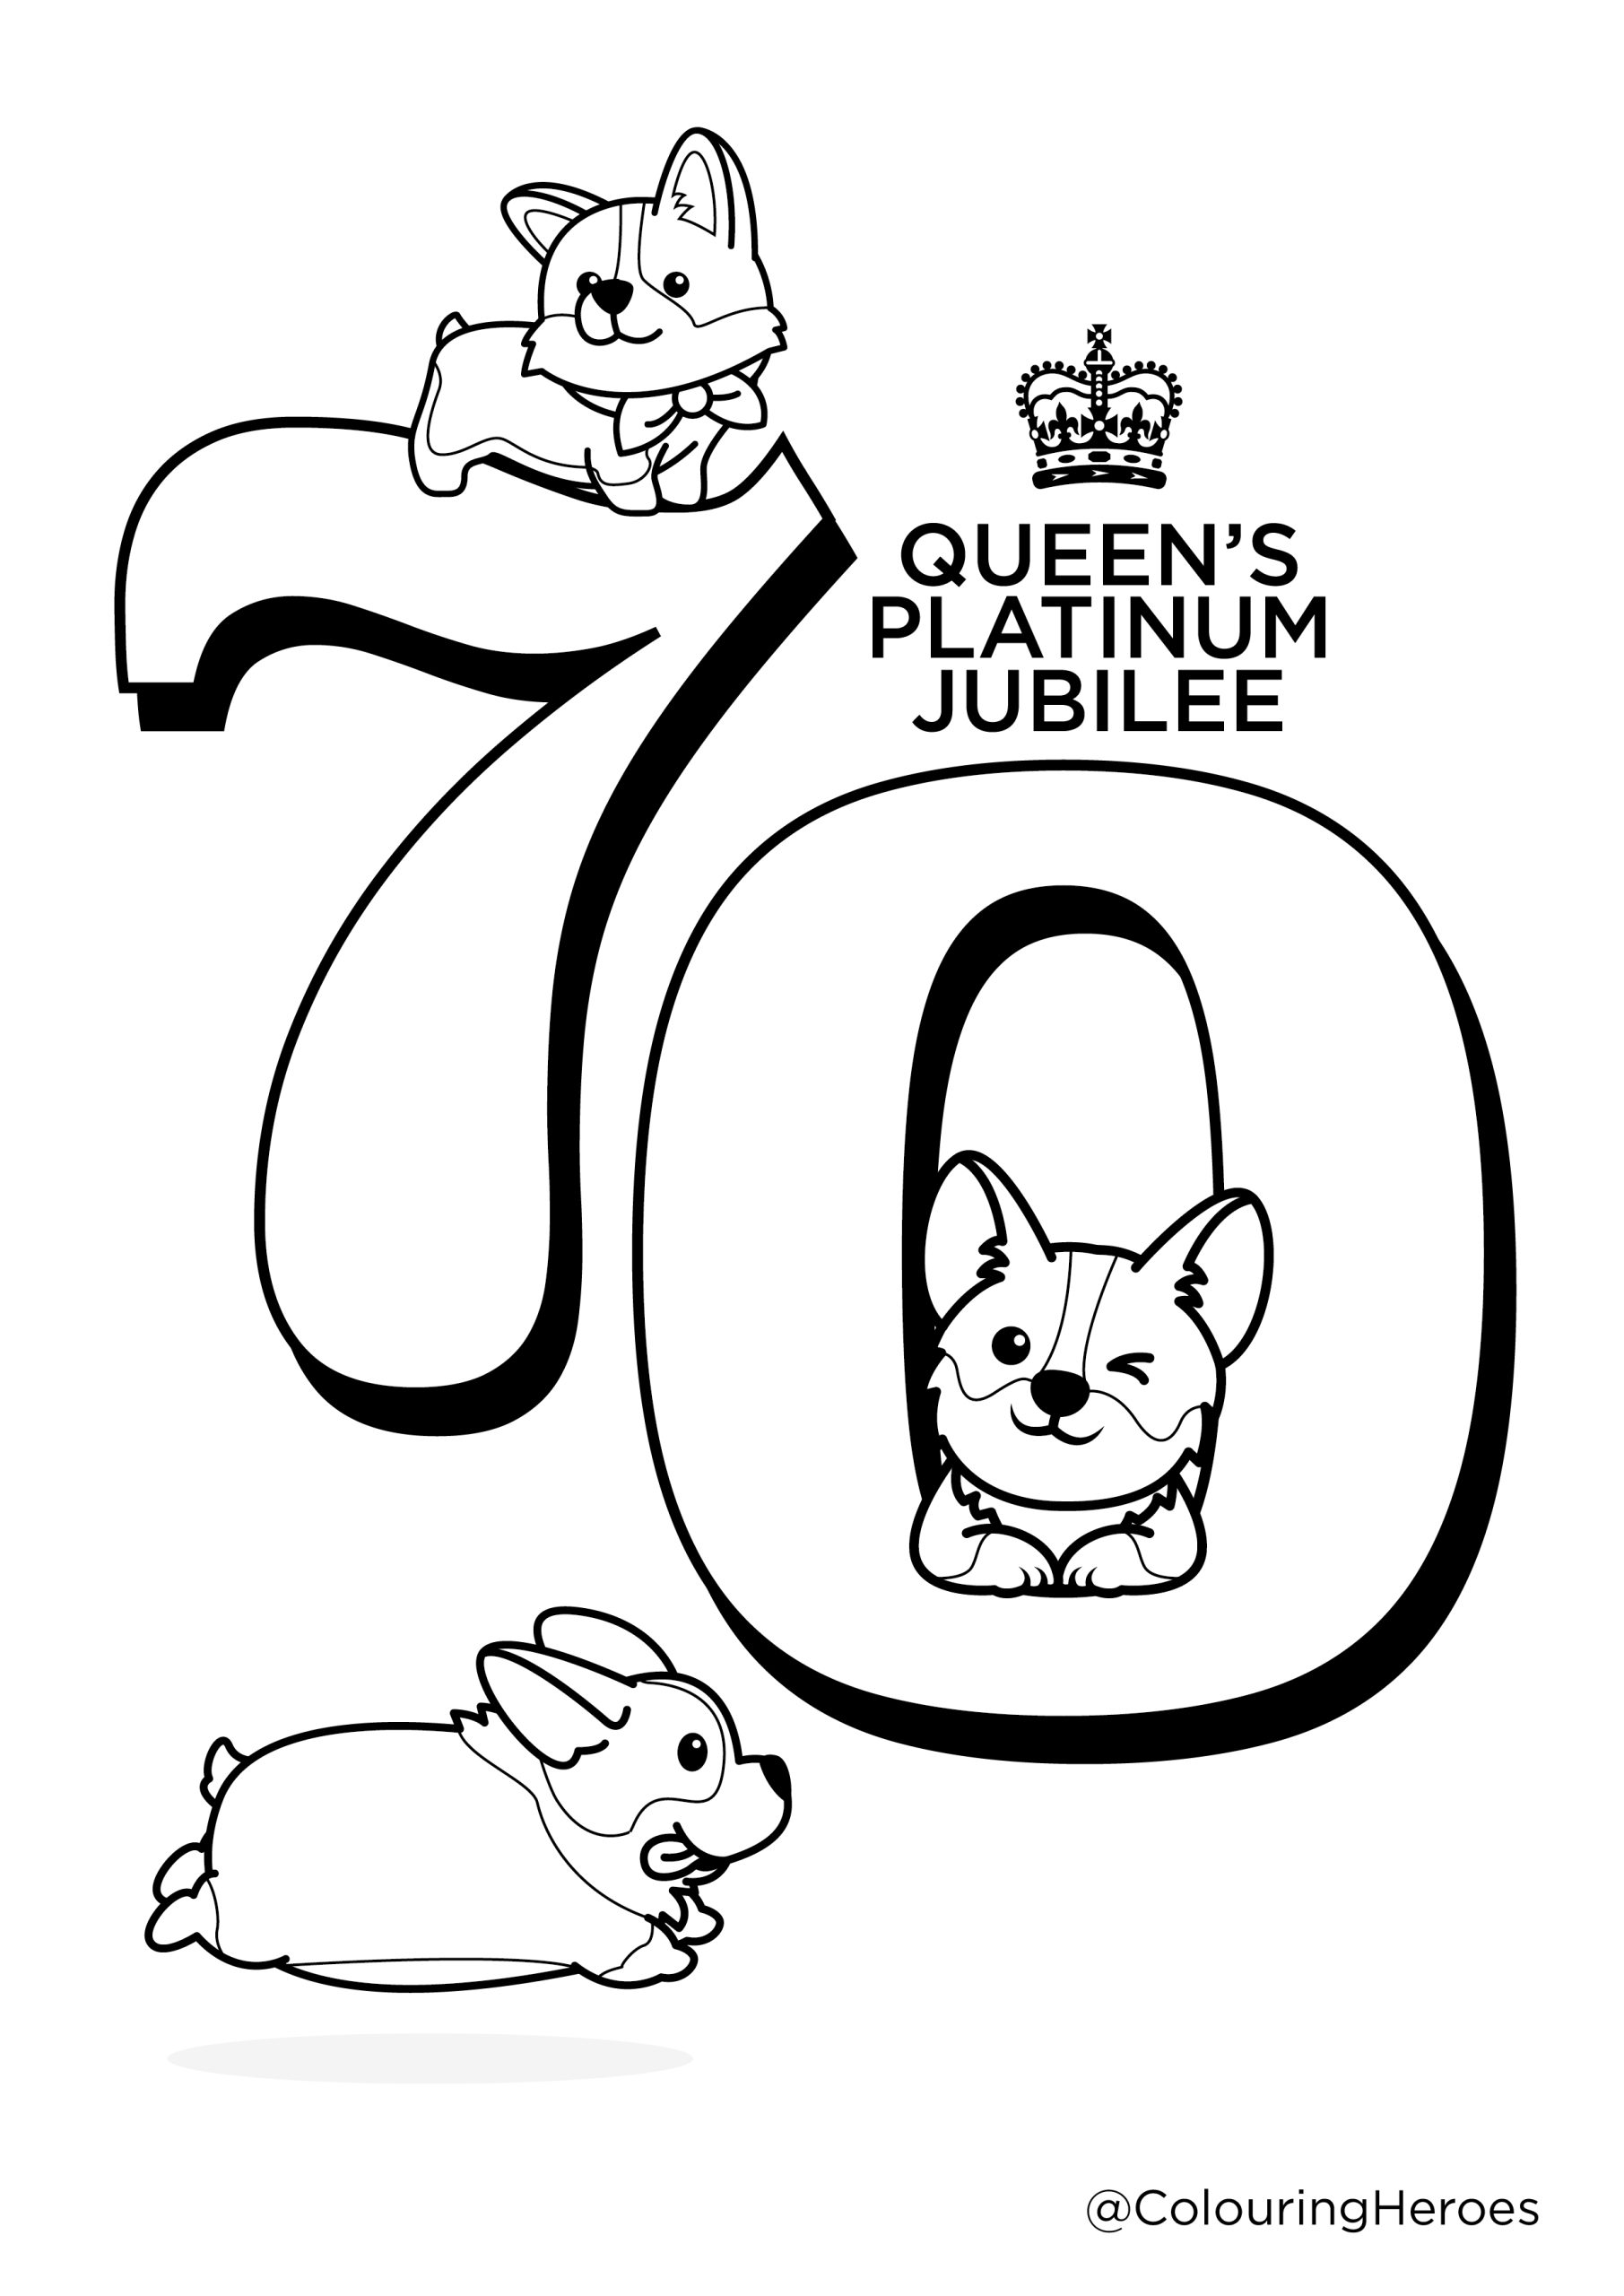 free jubilee colouring sheets for kids Coloring pages: jubilee, printable for kids & adults, free